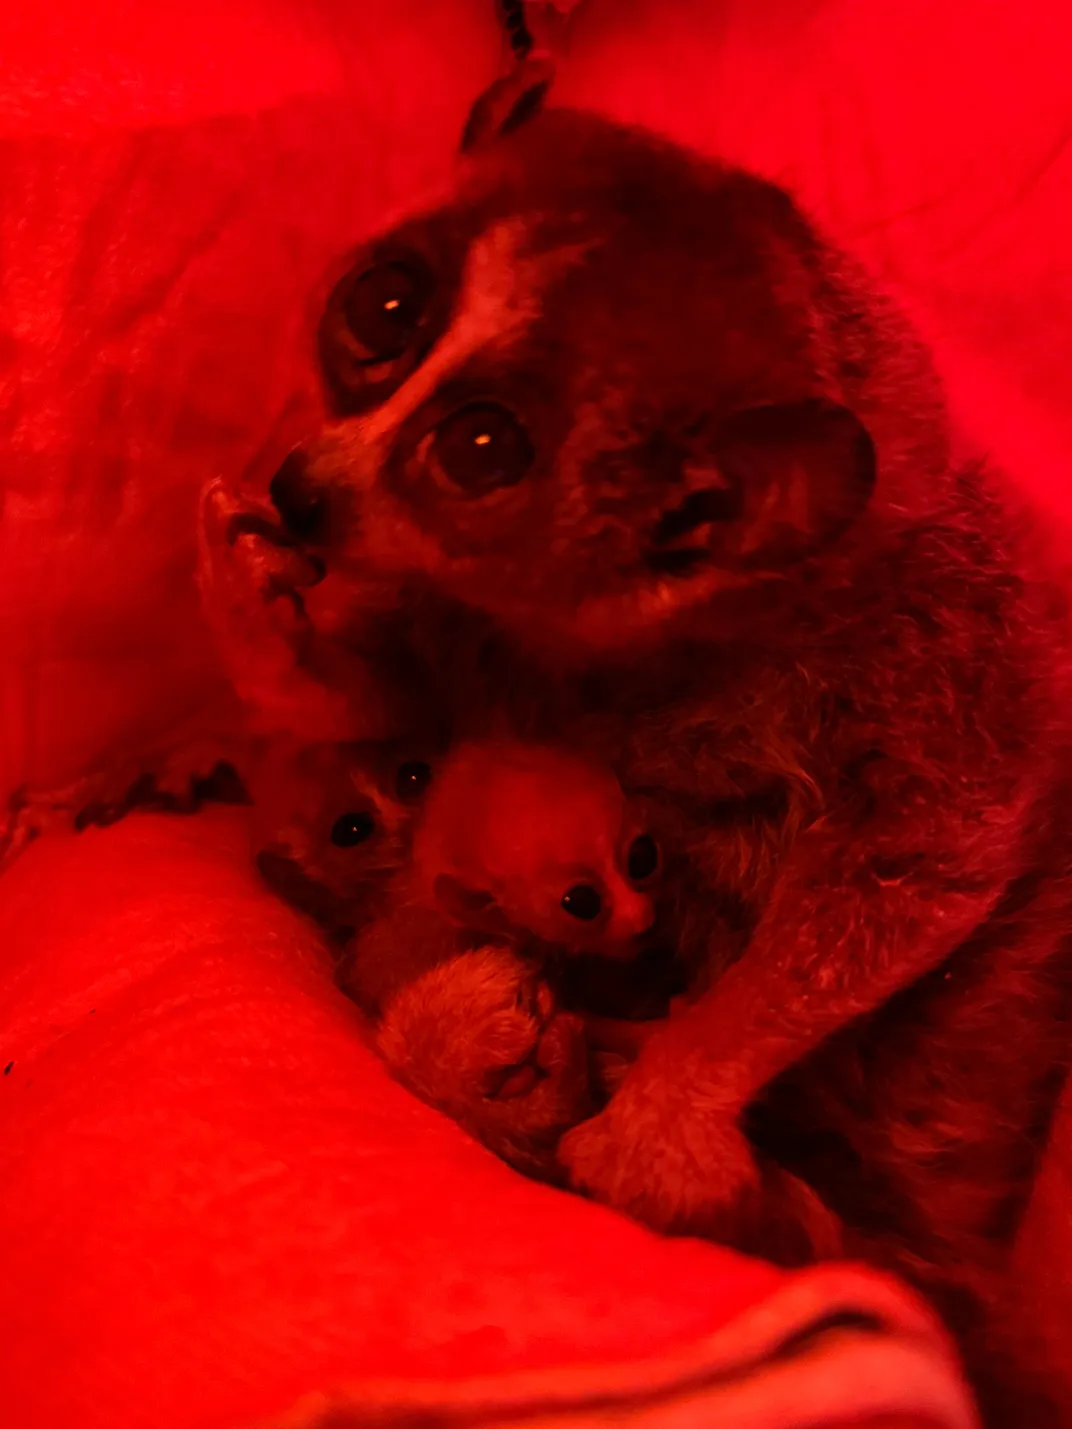 Pygmy slow loris in red light with babies visible